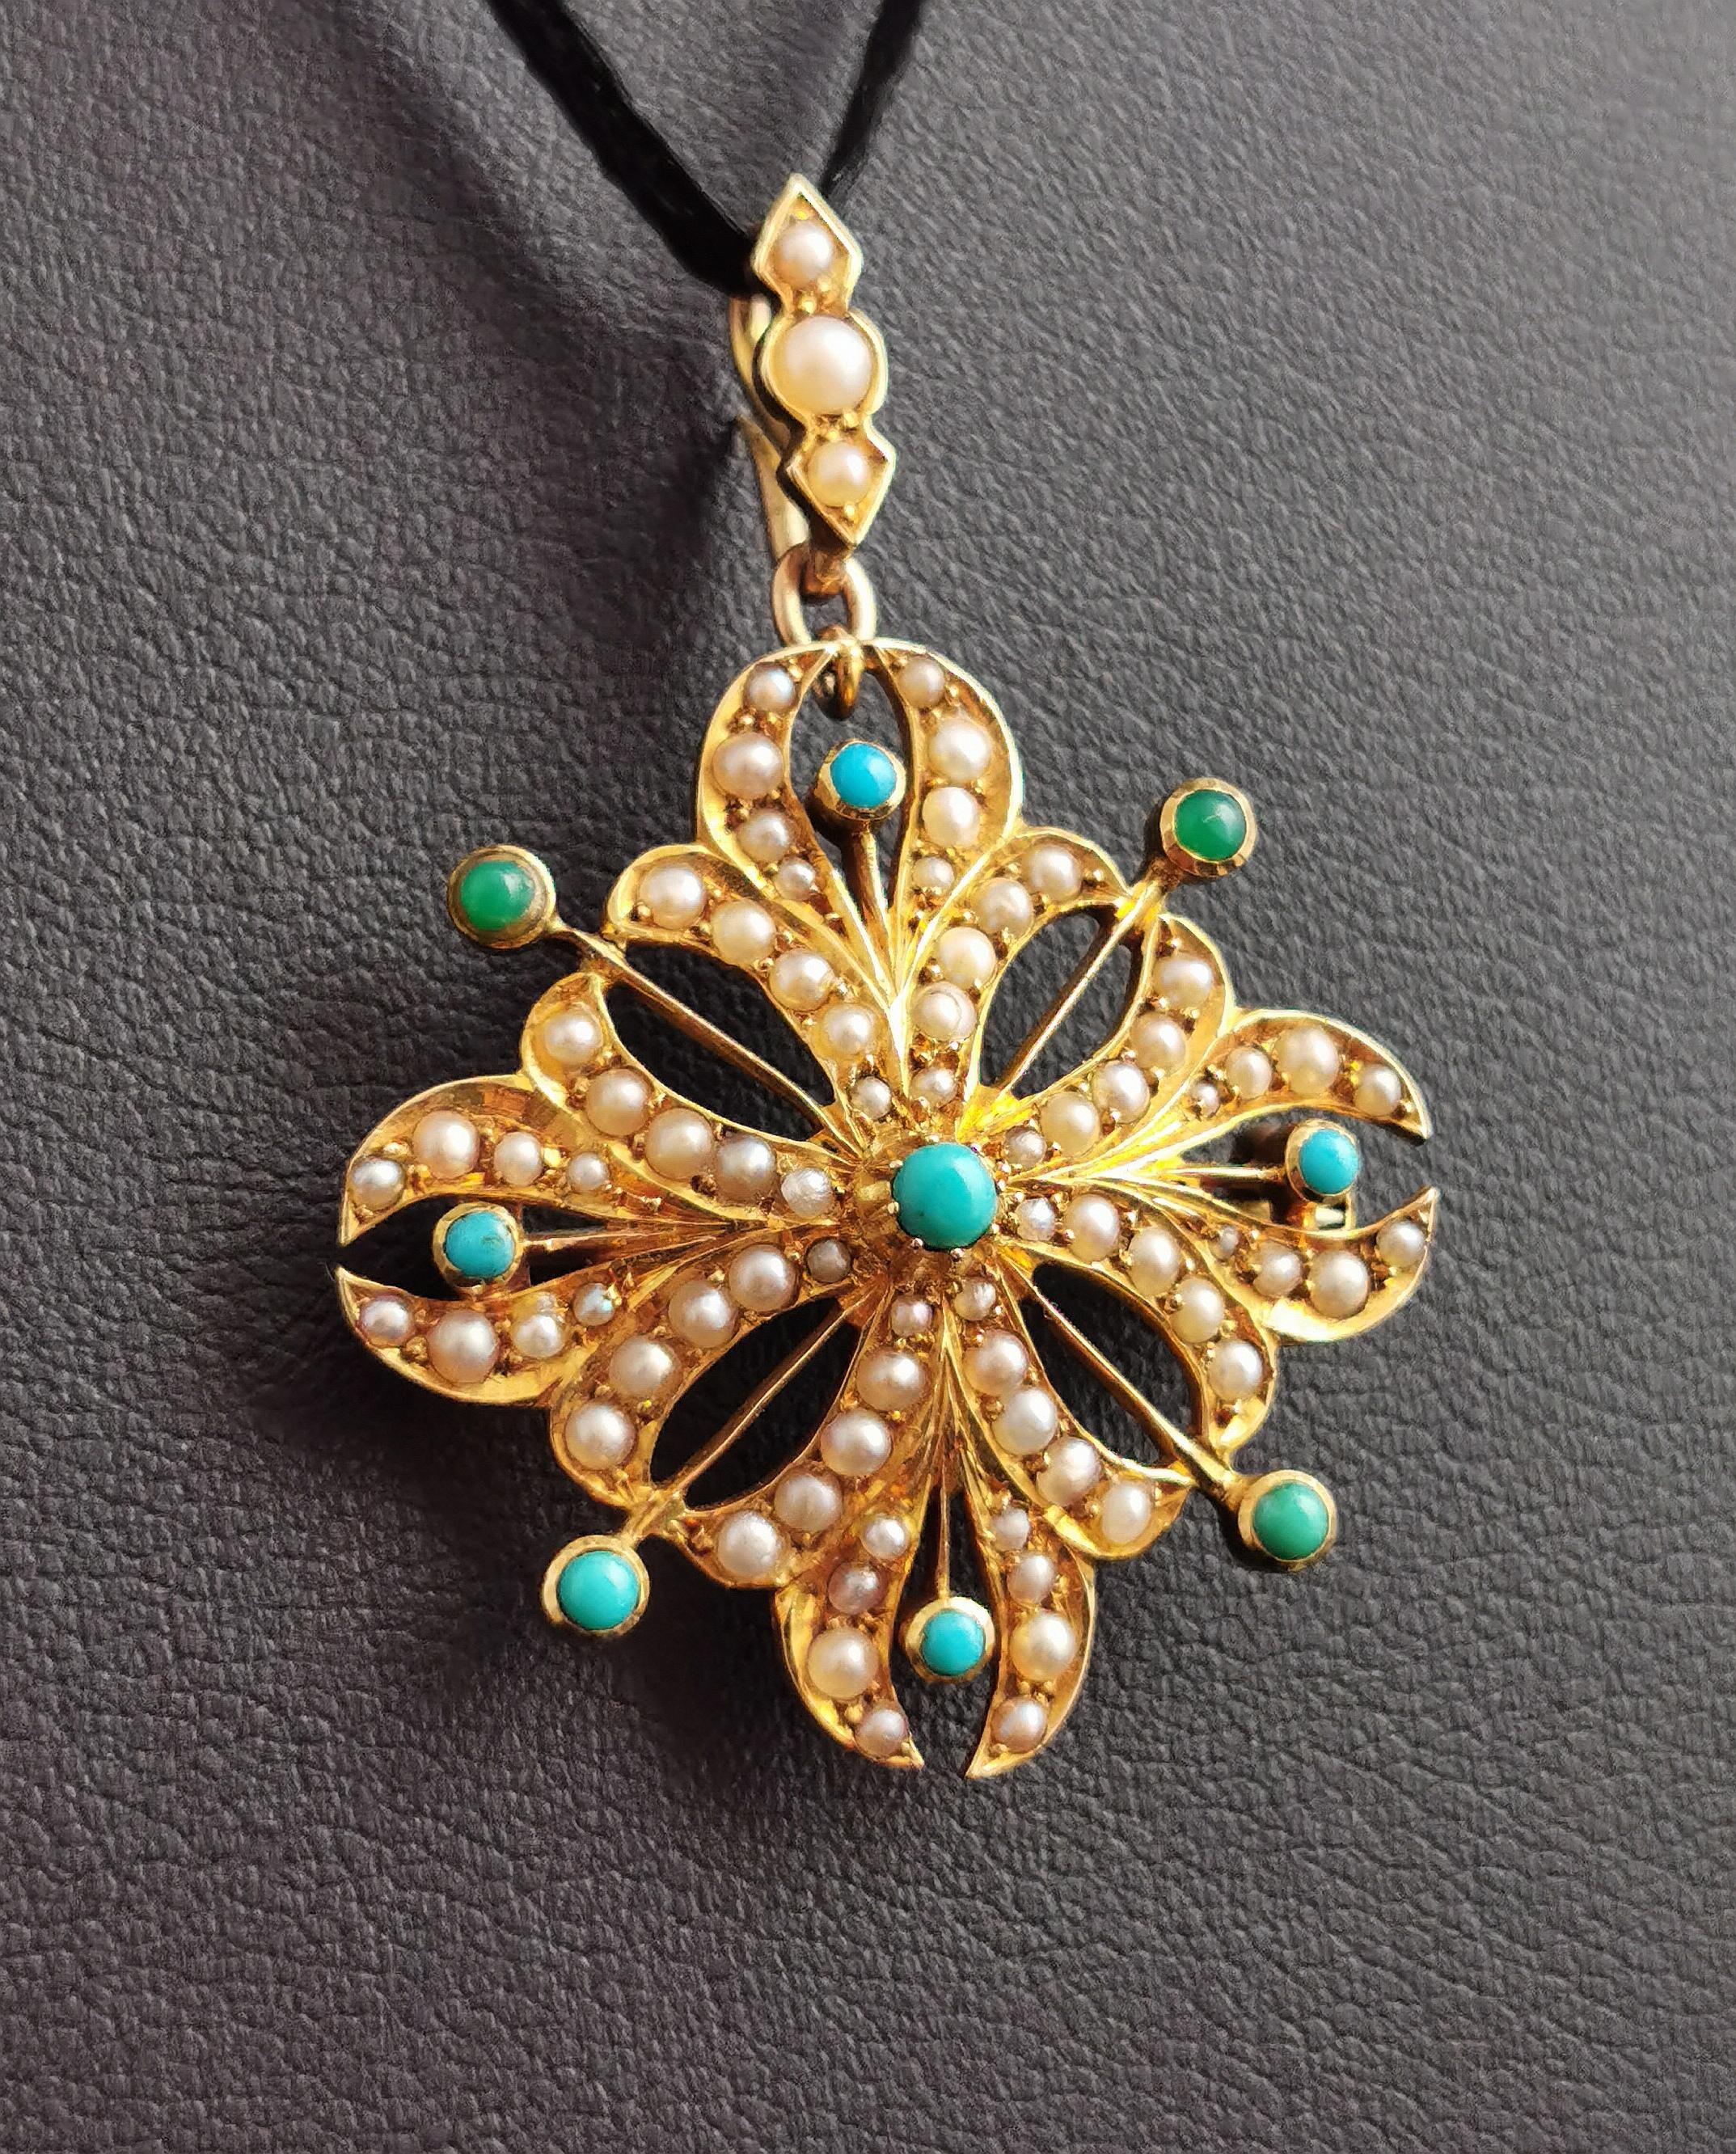 A truly stunning antique Art Nouveau era Turquoise and pearl pendant brooch in 15kt yellow gold.

It is a beautifully crafted pieced, very well made and has an elaborate openwork design in a scrolling diamond shape set with creamy seed pearls, there